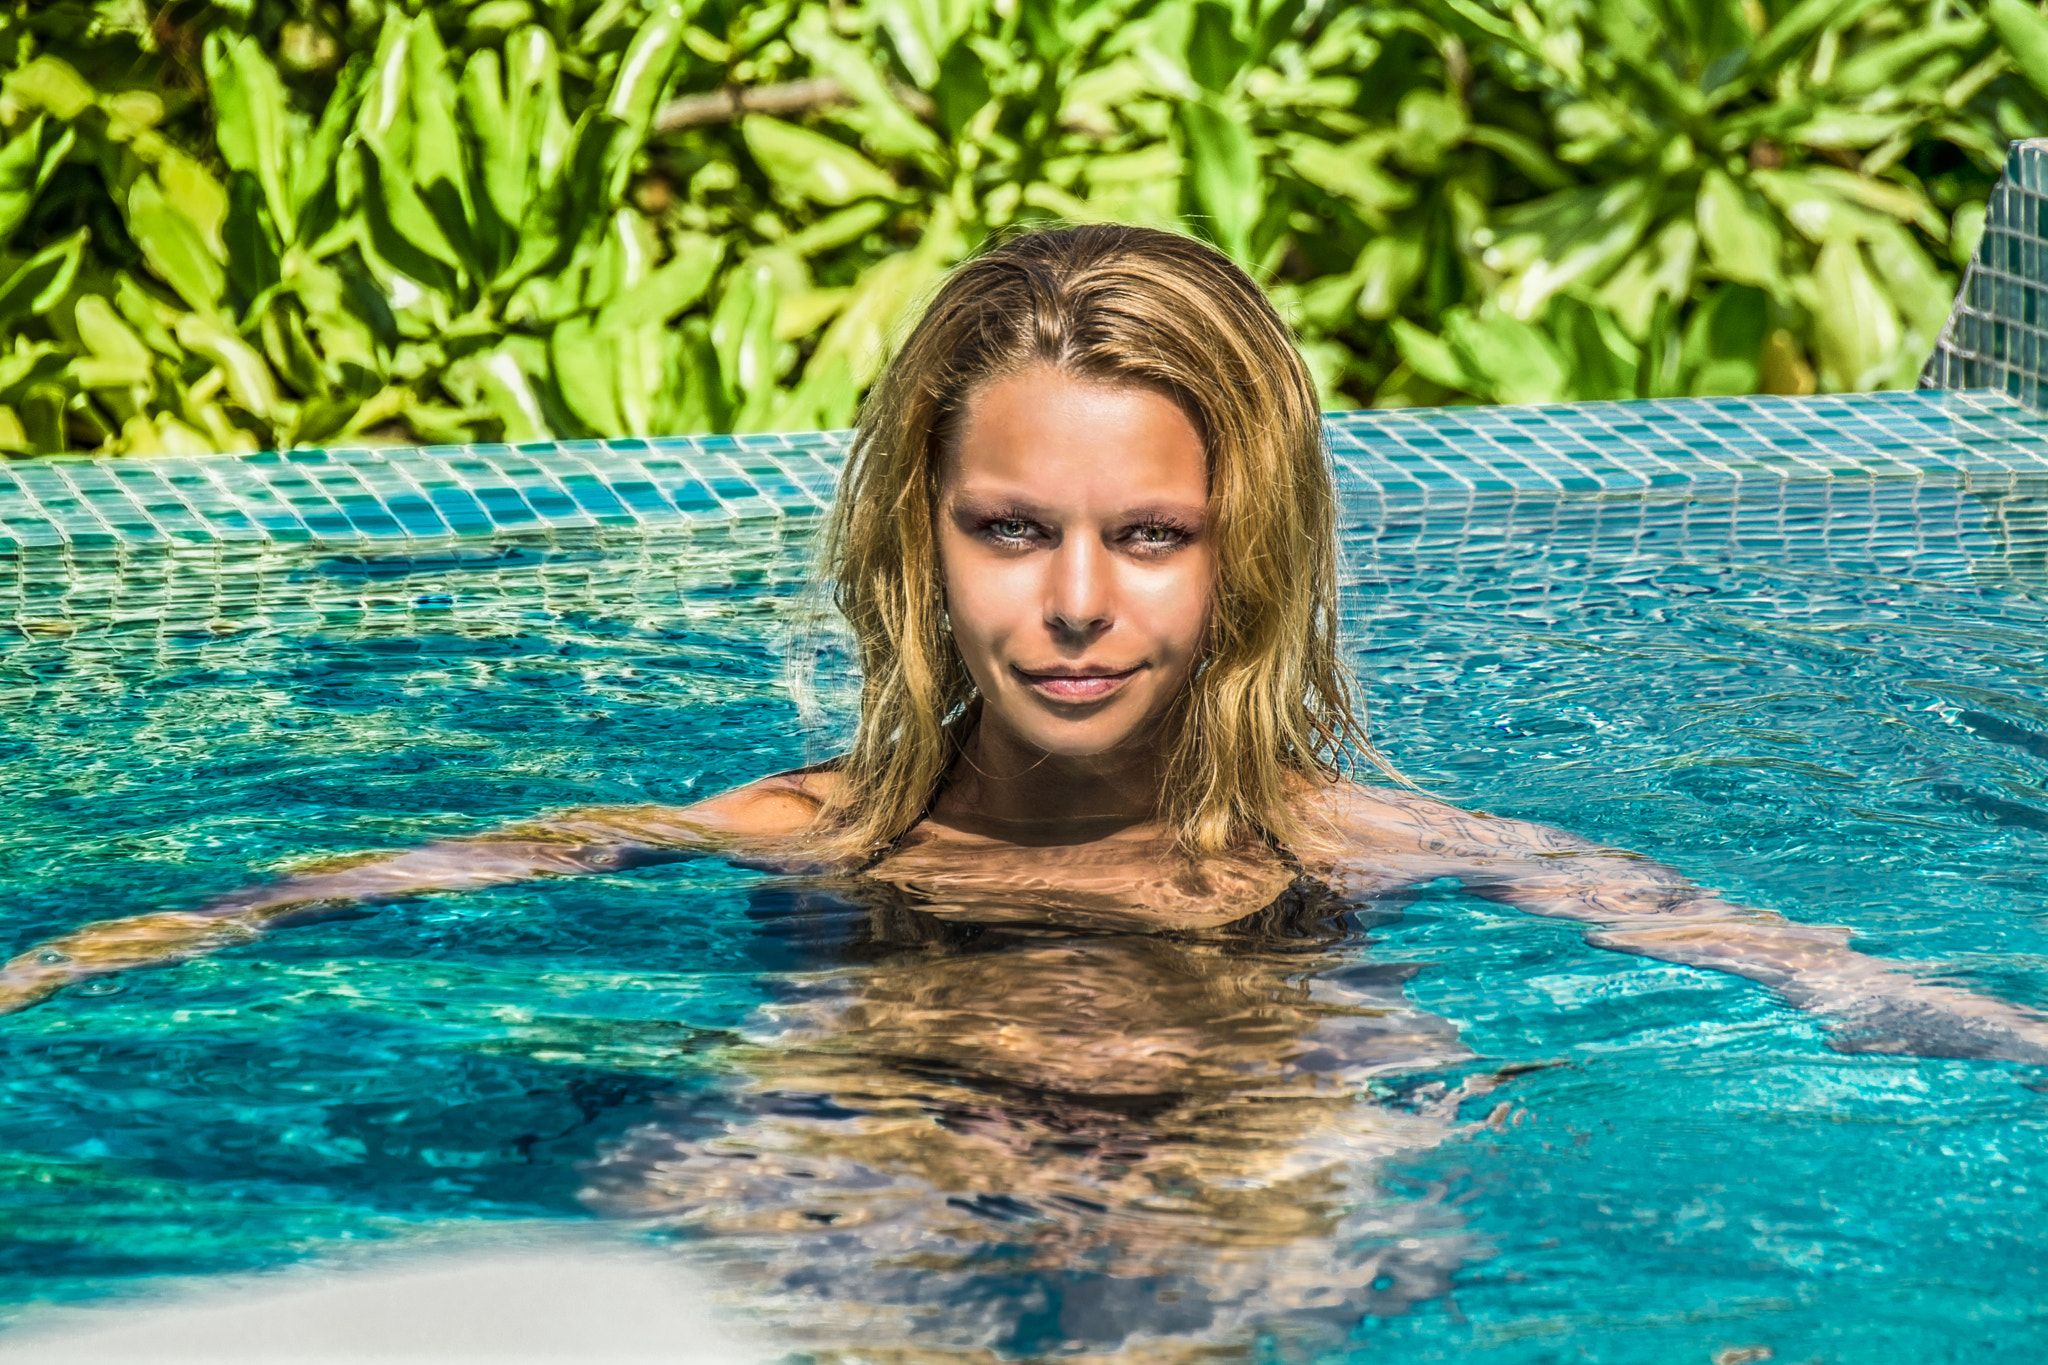 Nikon D7100 sample photo. Beauty by the pool photography